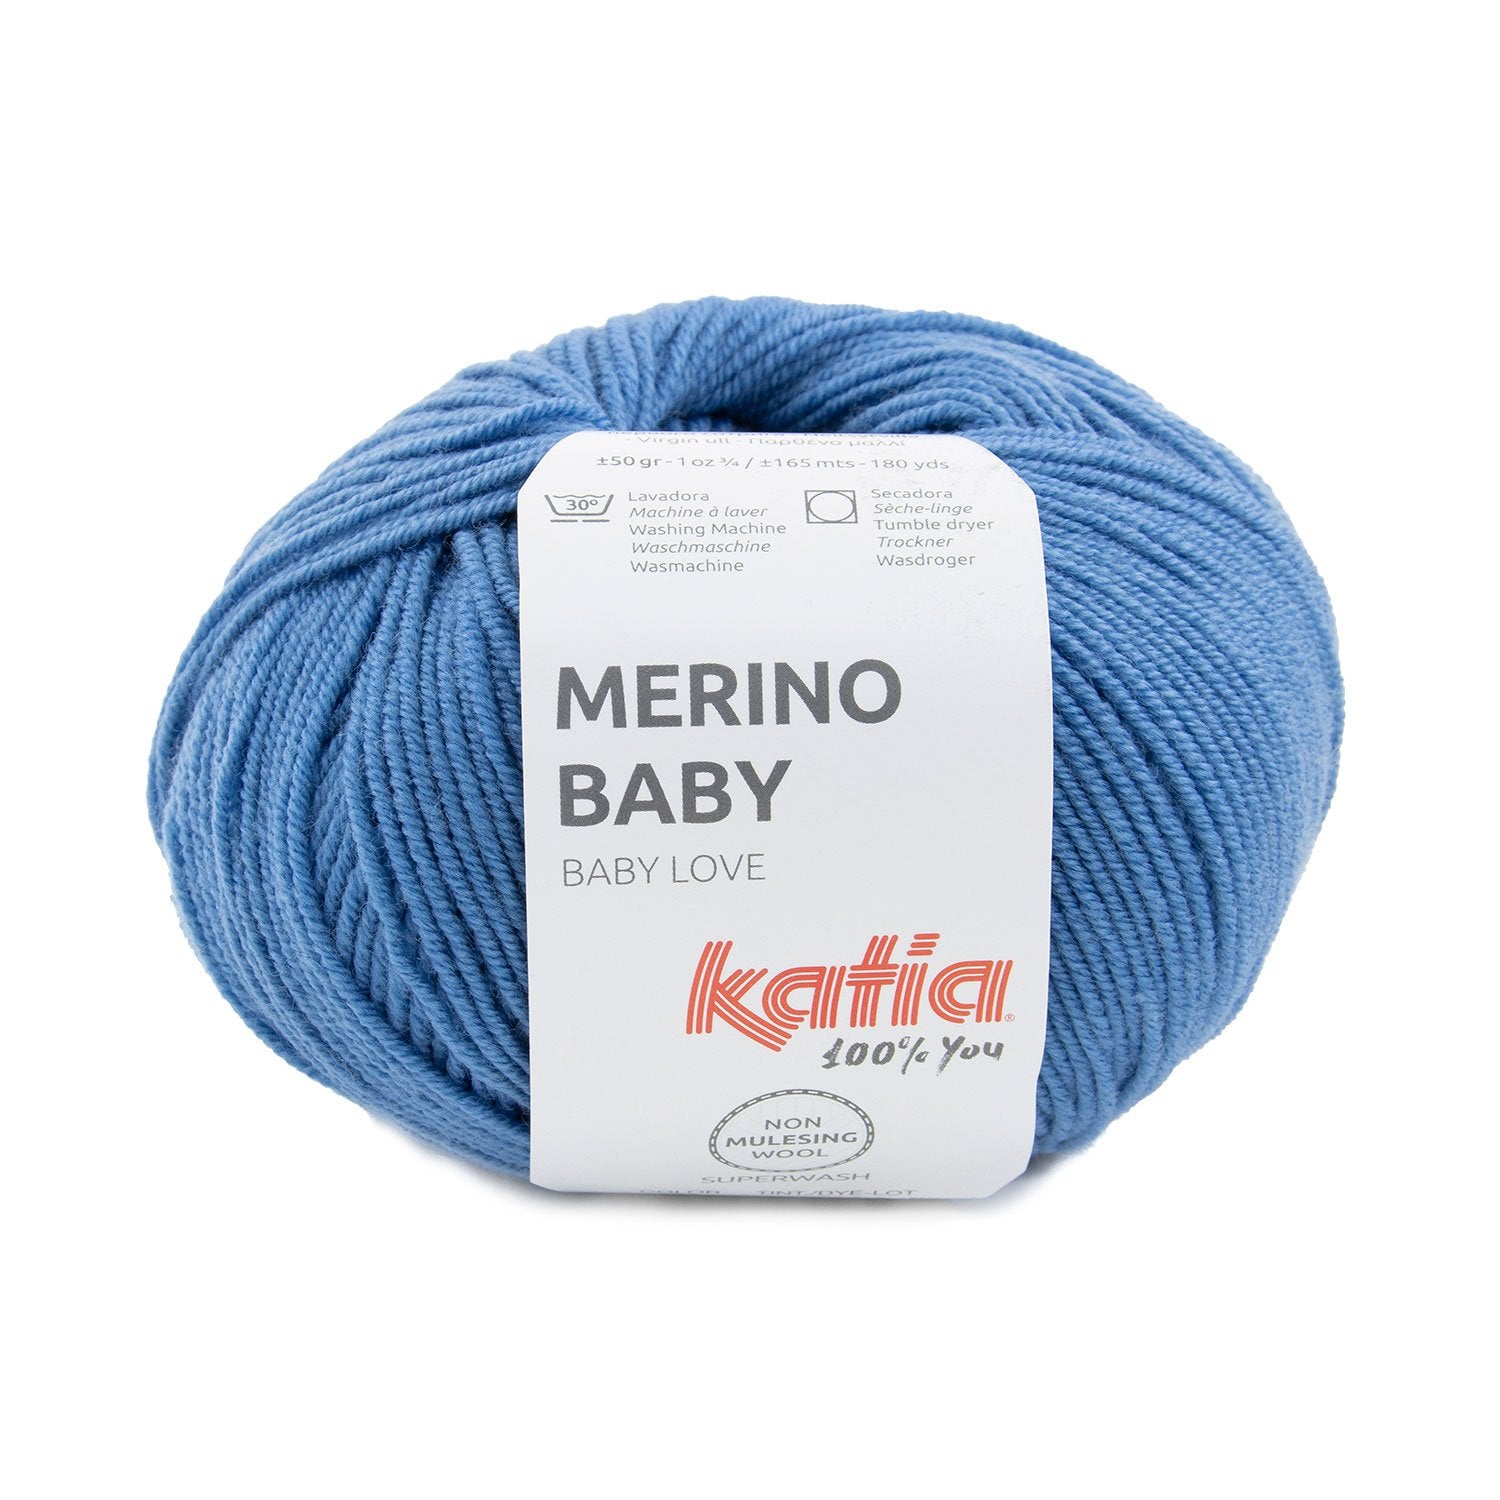 How to Wash Merino Wool Clothing - Heritage Park Laundry Essentials